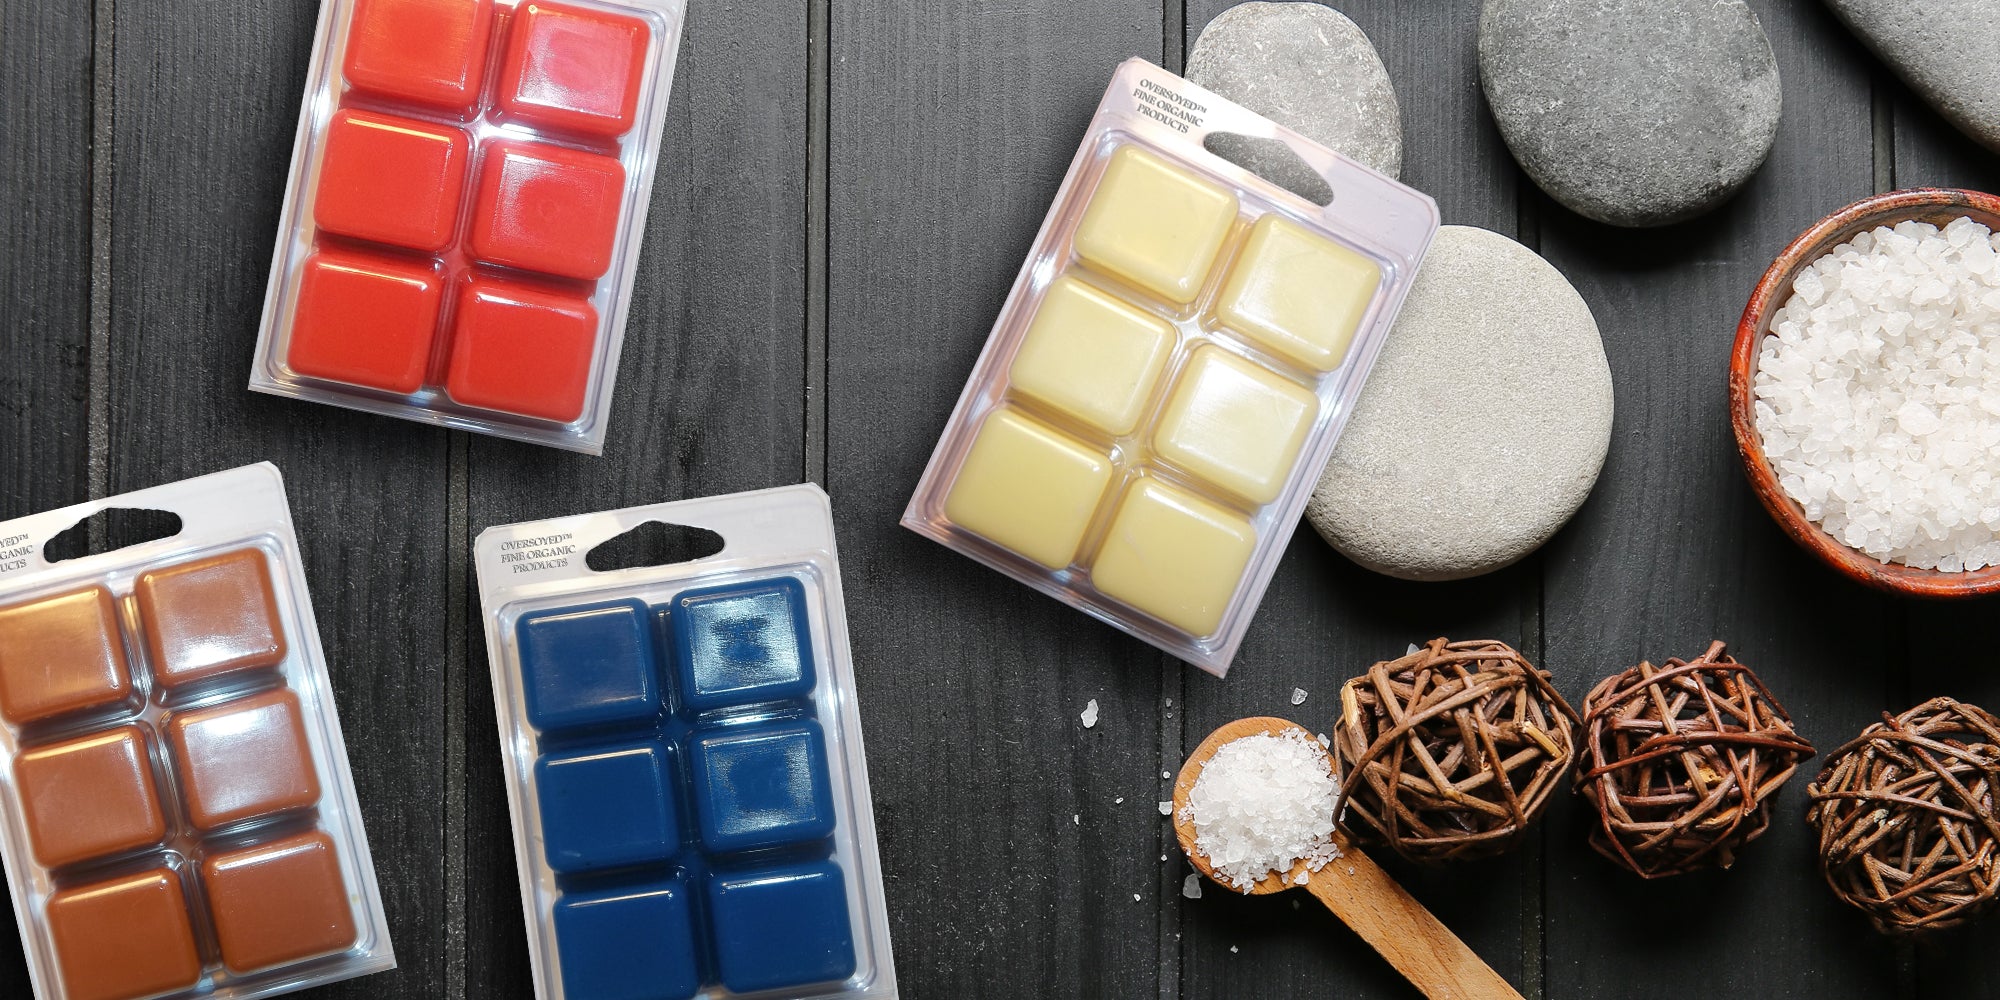 Paradise Beach Scented Natural Wax Melts